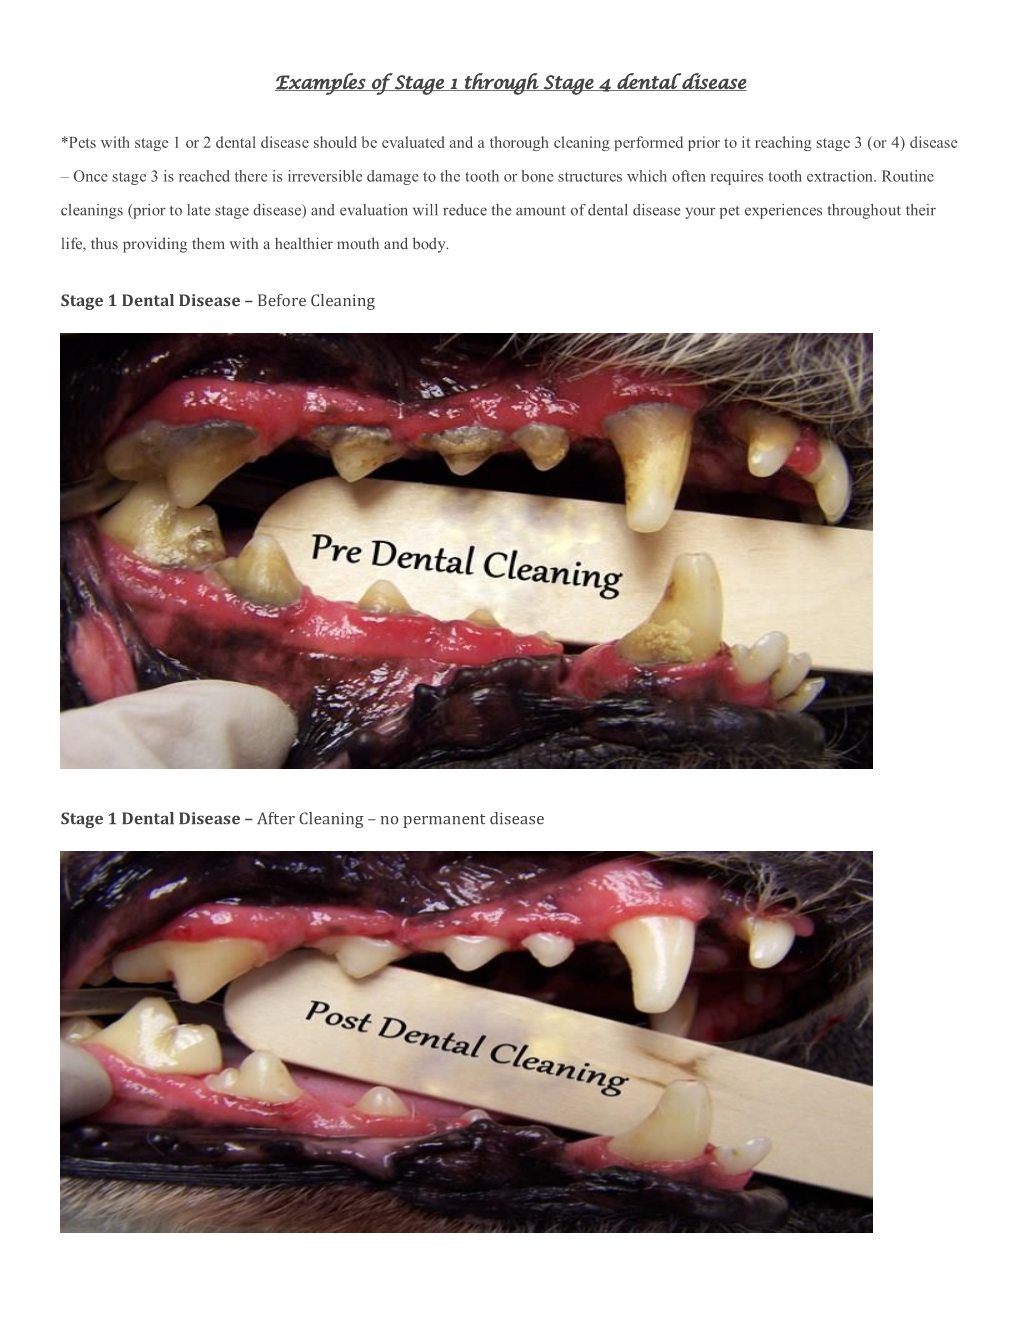 Four Stages of Dental Disease